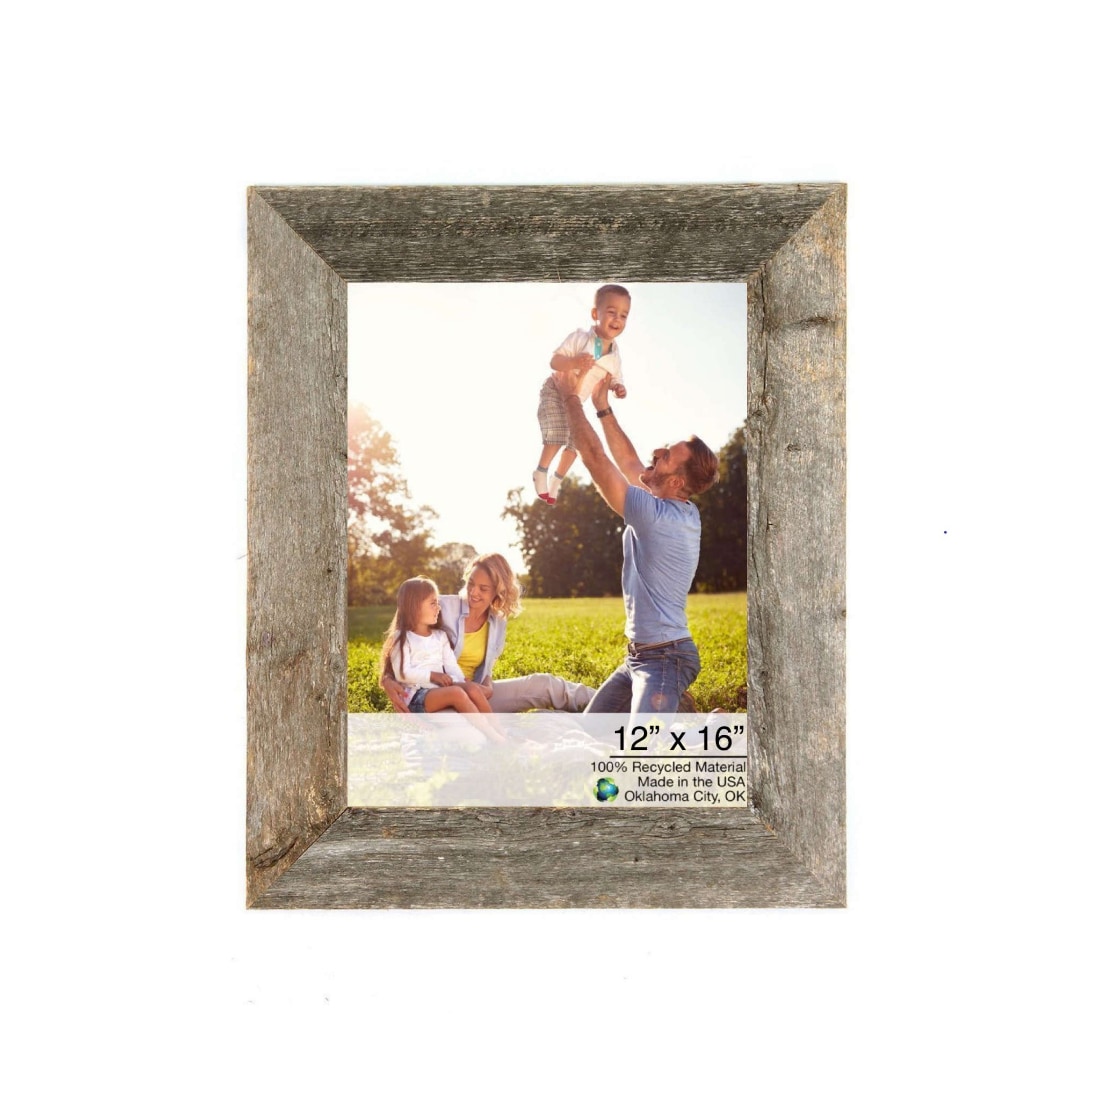 Hastings Home 703545SKF Collage Picture Frame with 12 openings 4x6 Pho